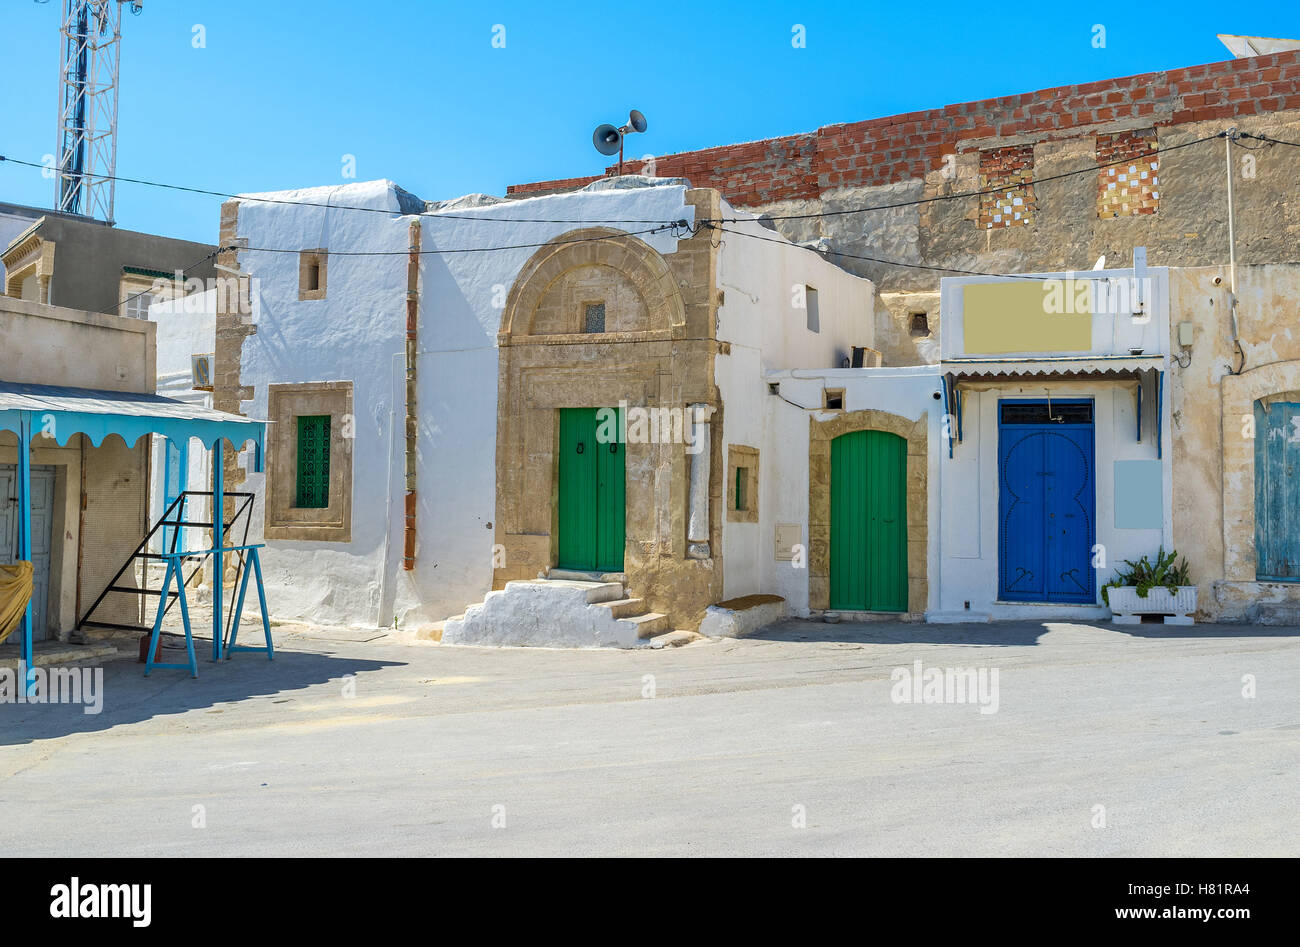 The tine square of the old town with many colorful wooden doors, Mahdia, Tunisia. Stock Photo